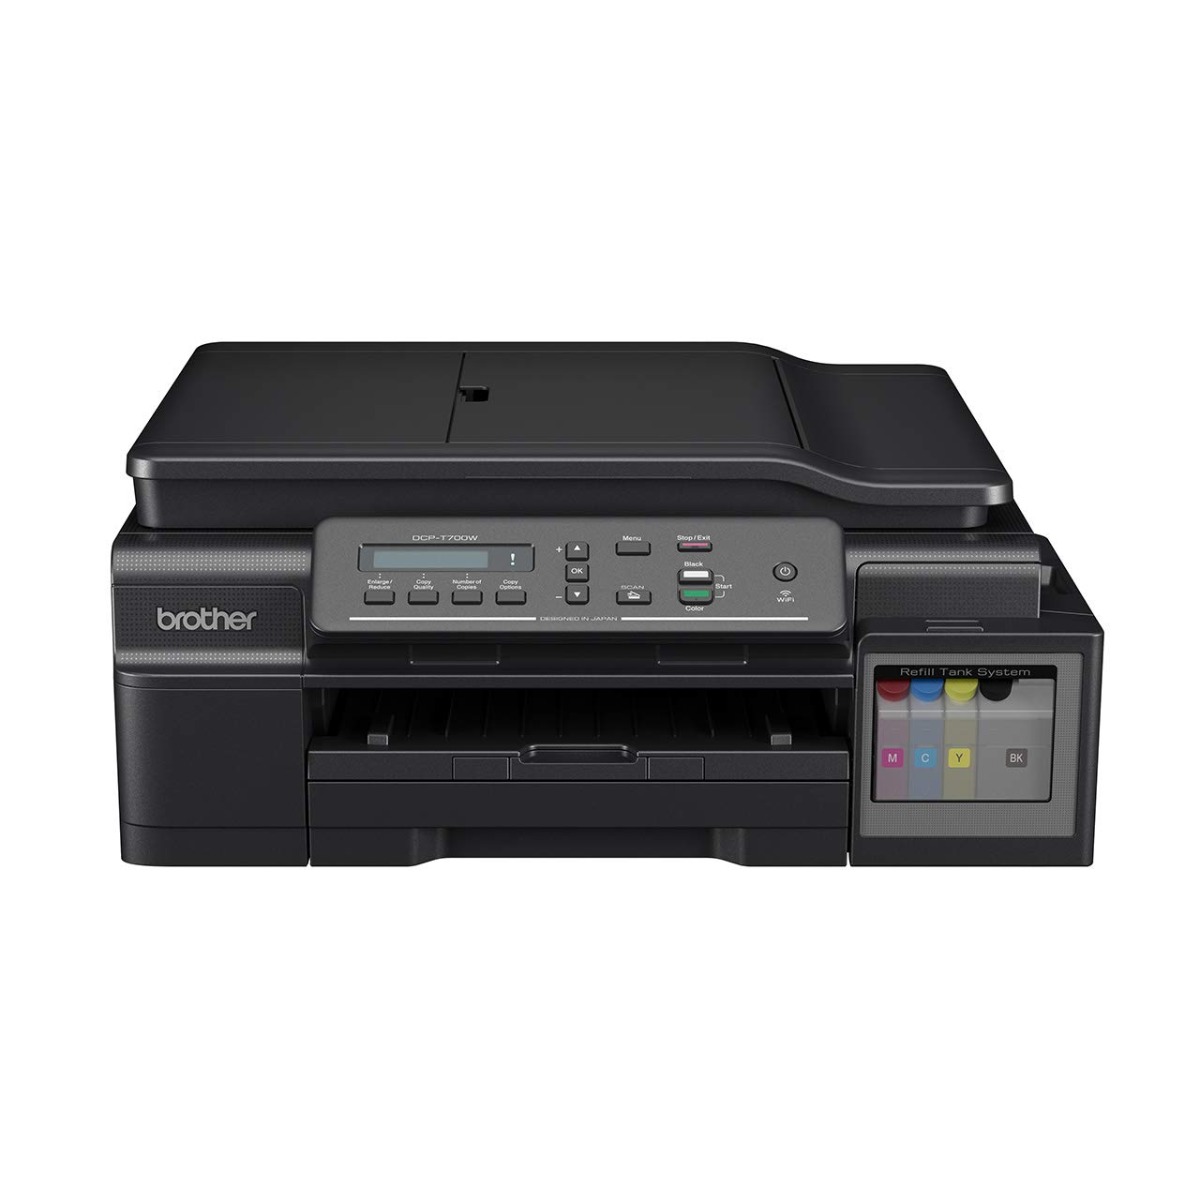 Brother DCP-T700W Ink Tank Multifunction Printer ...